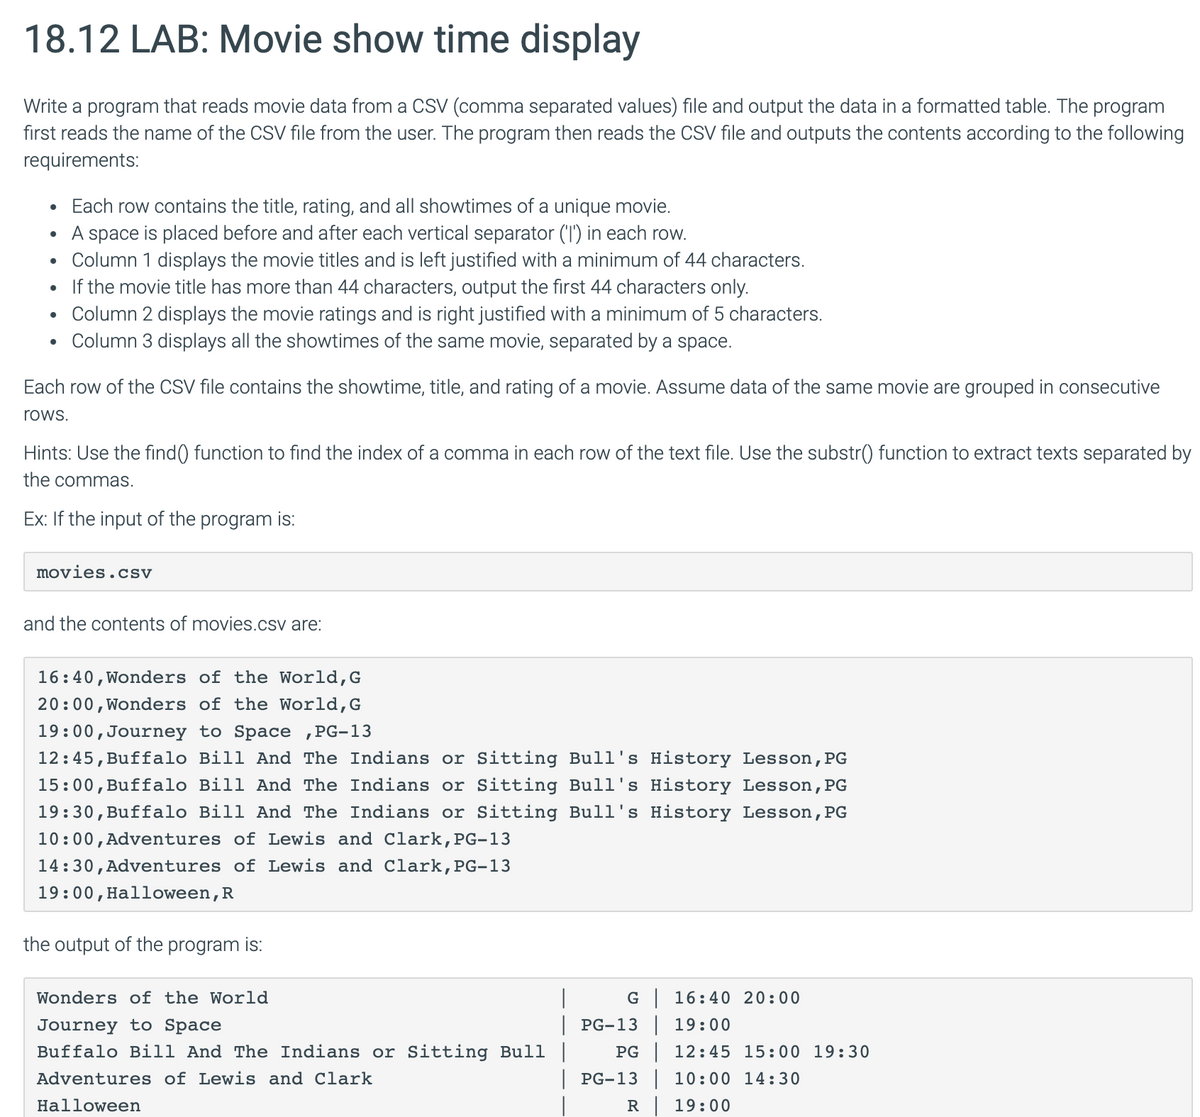 18.12 LAB: Movie show time display
Write a program that reads movie data from a CSV (comma separated values) file and output the data in a formatted table. The program
first reads the name of the CSV file from the user. The program then reads the CSV file and outputs the contents according to the following
requirements:
•
Each row contains the title, rating, and all showtimes of a unique movie.
• A space is placed before and after each vertical separator ('I') in each row.
•
Column 1 displays the movie titles and is left justified with a minimum of 44 characters.
•
If the movie title has more than 44 characters, output the first 44 characters only.
•
Column 2 displays the movie ratings and is right justified with a minimum of 5 characters.
Column 3 displays all the showtimes of the same movie, separated by a space.
Each row of the CSV file contains the showtime, title, and rating of a movie. Assume data of the same movie are grouped in consecutive
rows.
Hints: Use the find() function to find the index of a comma in each row of the text file. Use the substr() function to extract texts separated by
the commas.
Ex: If the input of the program is:
movies.cSV
and the contents of movies.csv are:
16:40, Wonders of the World, G
20:00, Wonders of the World, G
19:00, Journey to Space, PG-13
12:45, Buffalo Bill And The Indians or Sitting Bull's History Lesson, PG
15:00, Buffalo Bill And The Indians or Sitting Bull's History Lesson, PG
19:30, Buffalo Bill And The Indians or Sitting Bull's History Lesson, PG
10:00, Adventures of Lewis and Clark, PG-13
14:30, Adventures of Lewis and Clark, PG-13
19:00, Halloween, R
the output of the program is:
Wonders of the World
Journey to Space
Buffalo Bill And The Indians or Sitting Bull |
Adventures of Lewis and Clark
Halloween
G | 16:40 20:00
| PG-13 | 19:00
PG 12:45 15:00 19:30
| PG-13 | 10:00 14:30
R 19:00